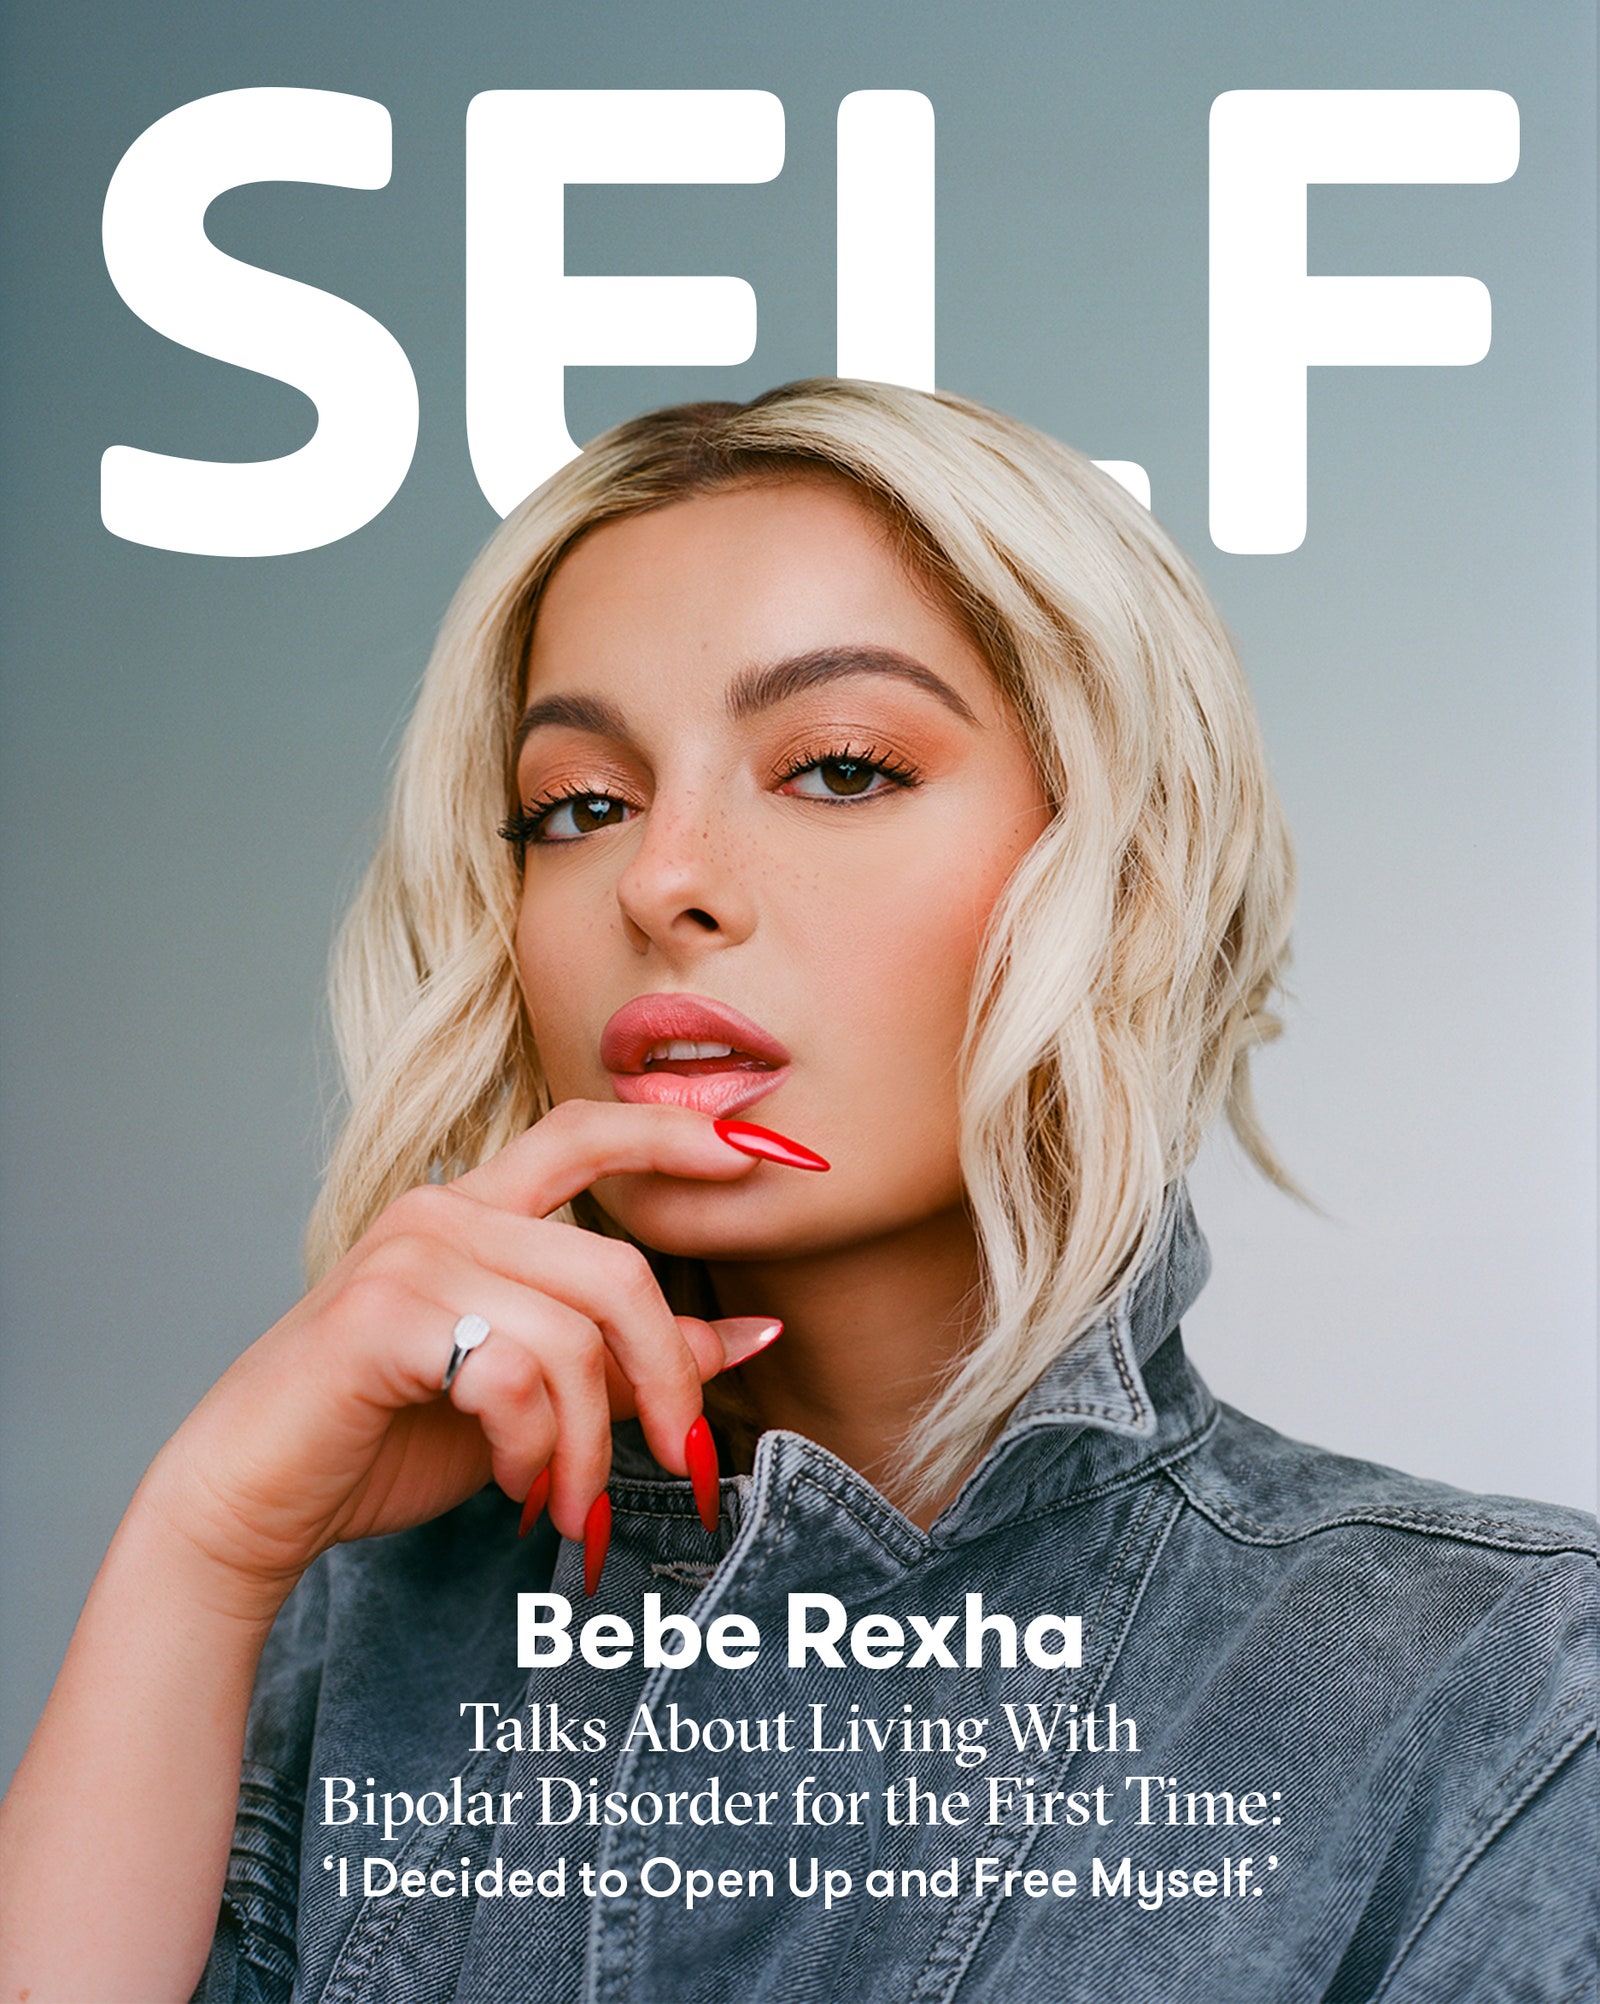 Bebe Rexha comprises all 165 pounds like herself